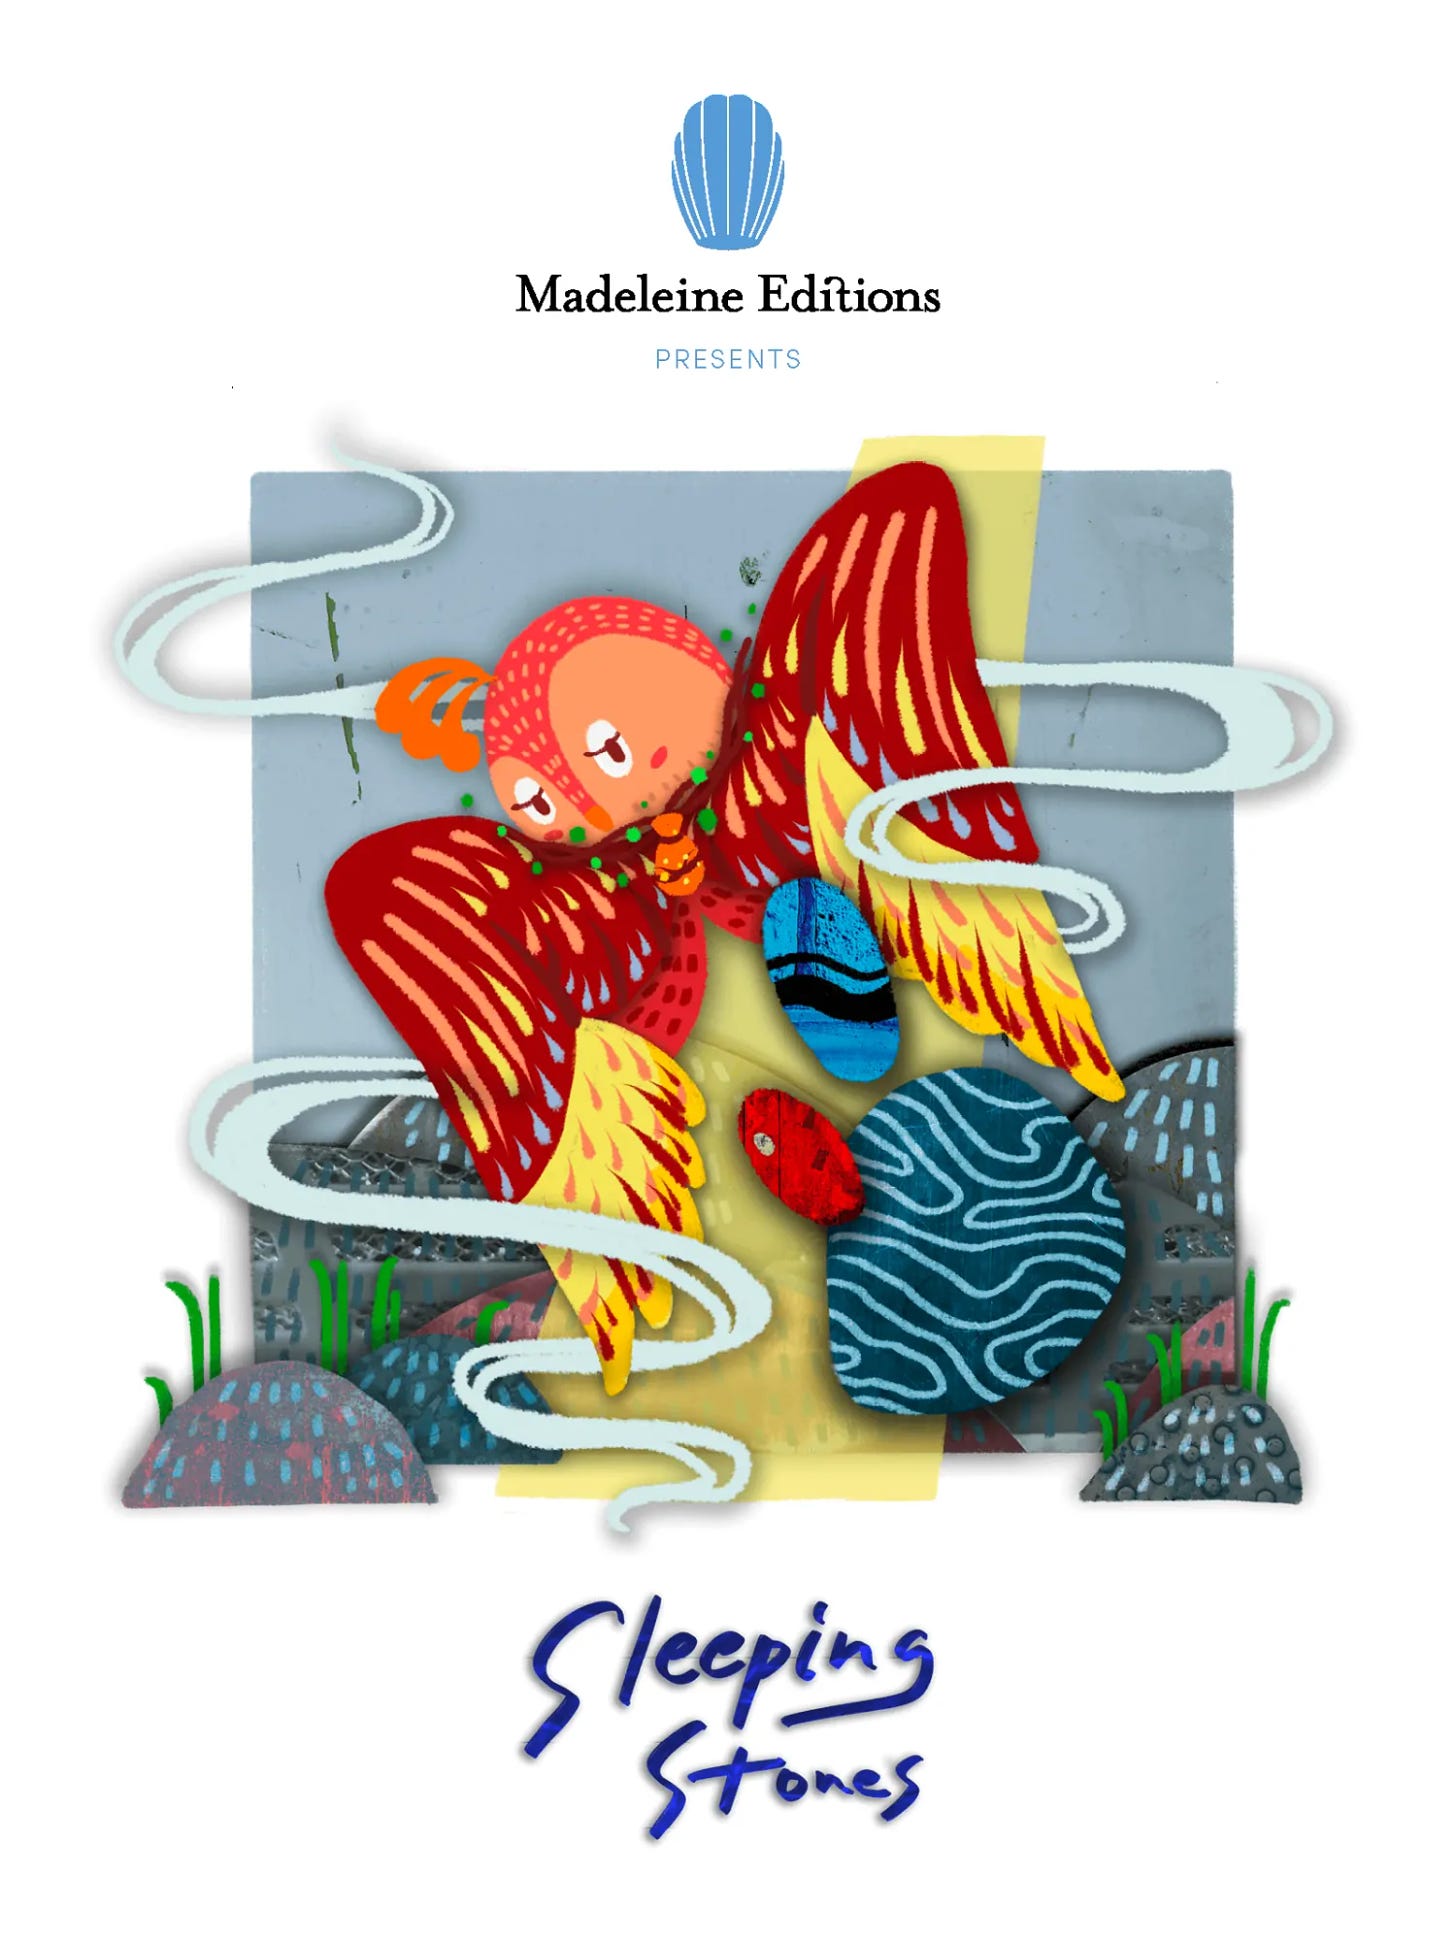 cover of Kaitlin Solimine's multilingual children's book, Sleeping Stones, with an image of an owl